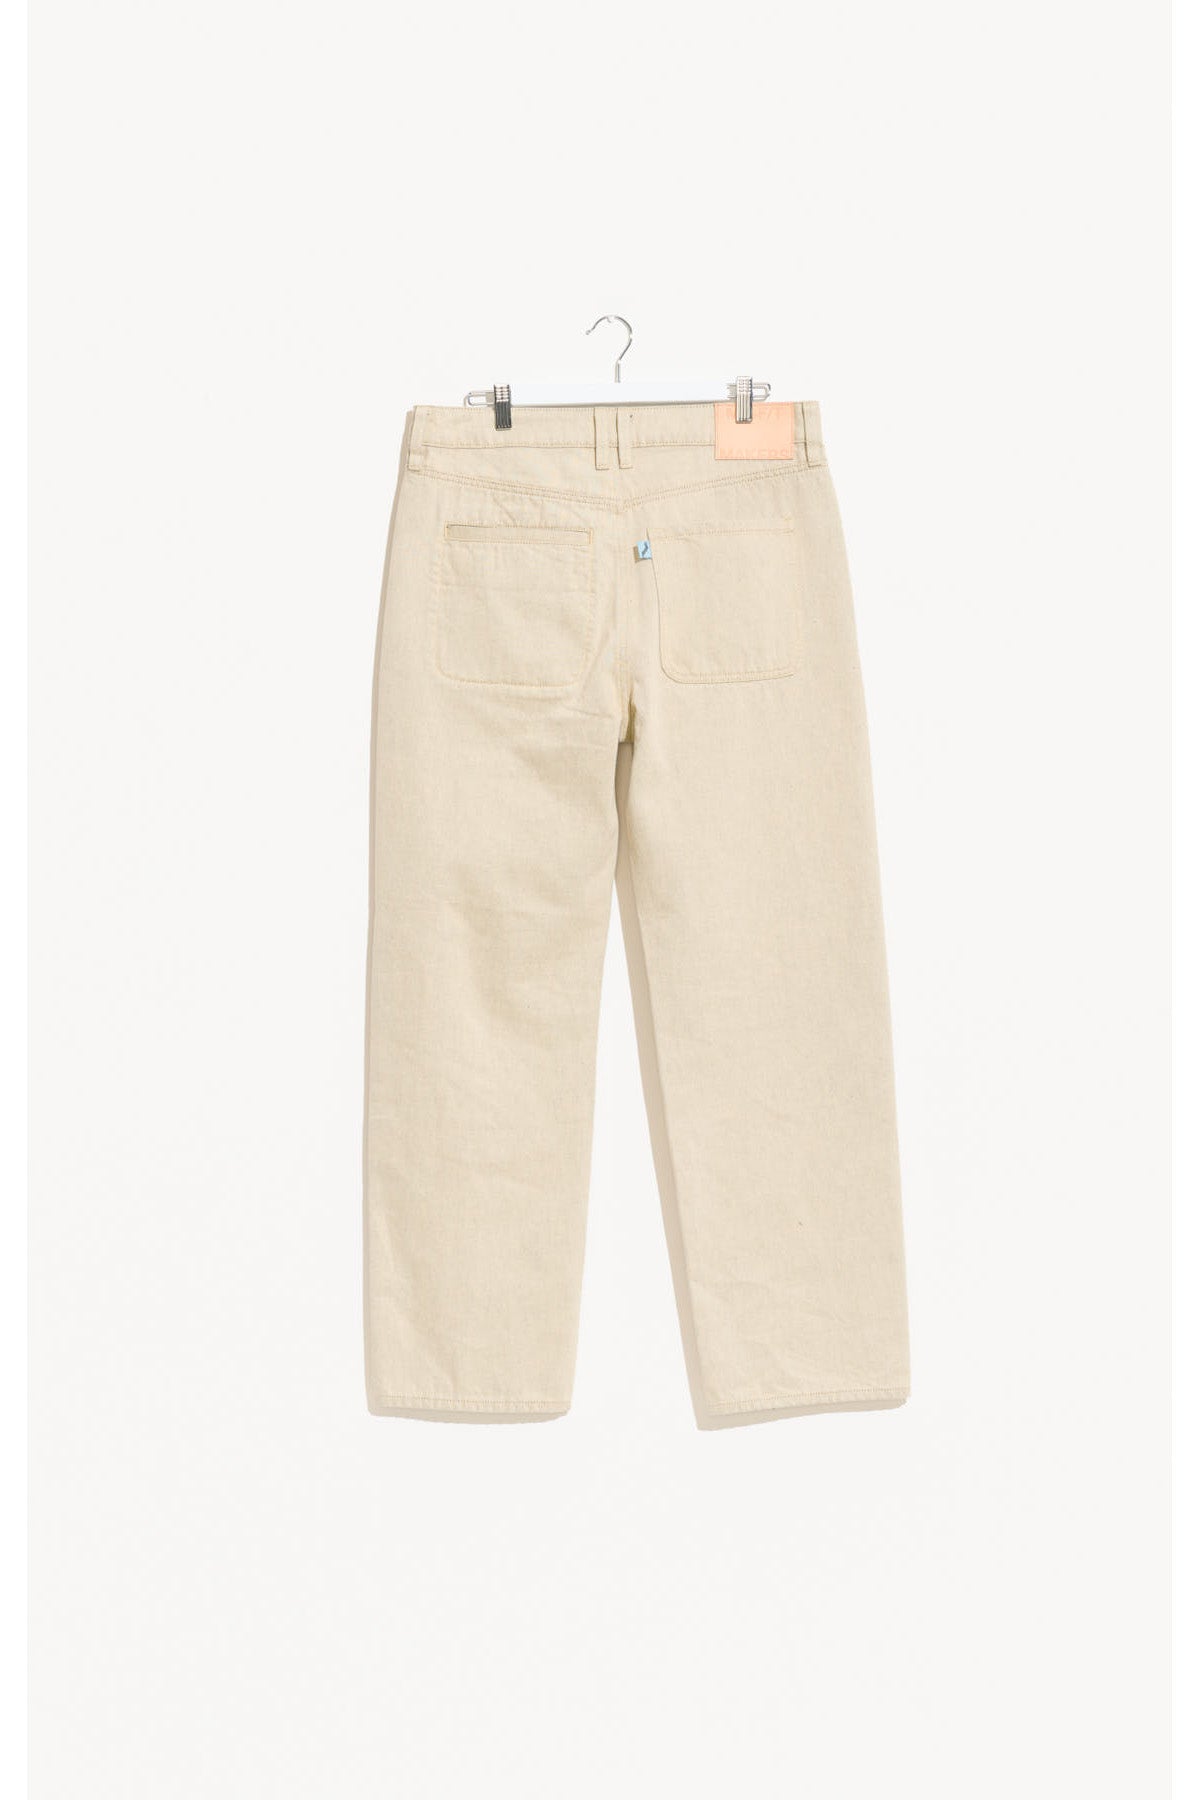 Misfit Shapes - Men'S Makers Relaxed Jean - Mellow